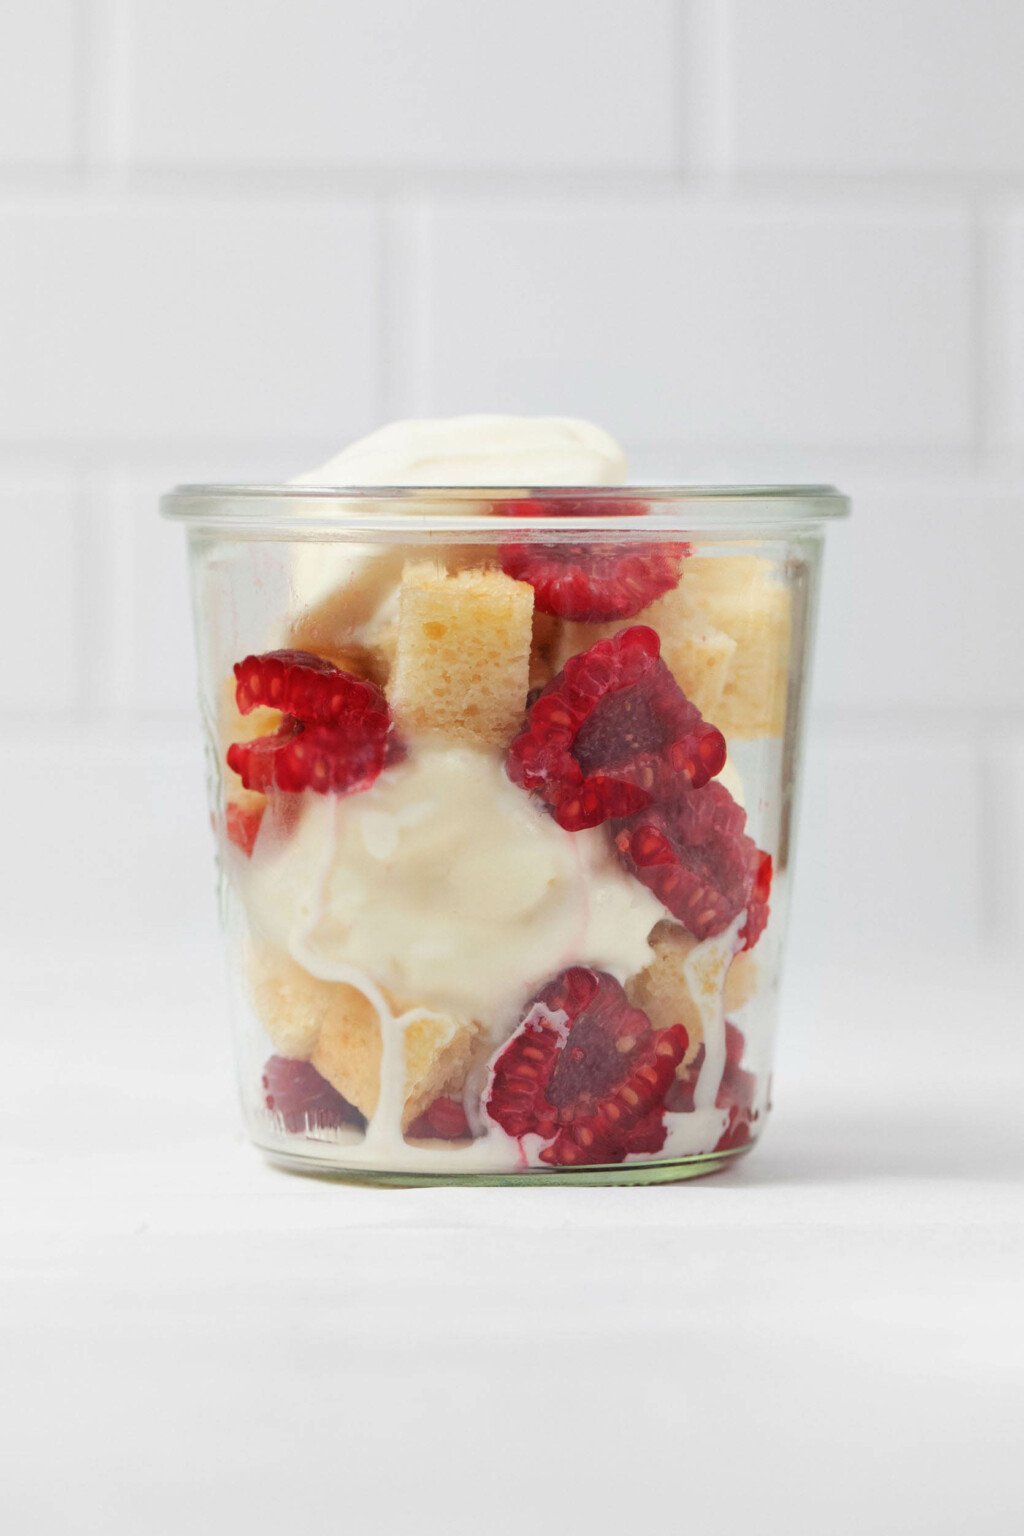 A clear, Weck mason jar holds the ingredients for a mini trifle, which is made with berries, lemon cake, and ice cream.